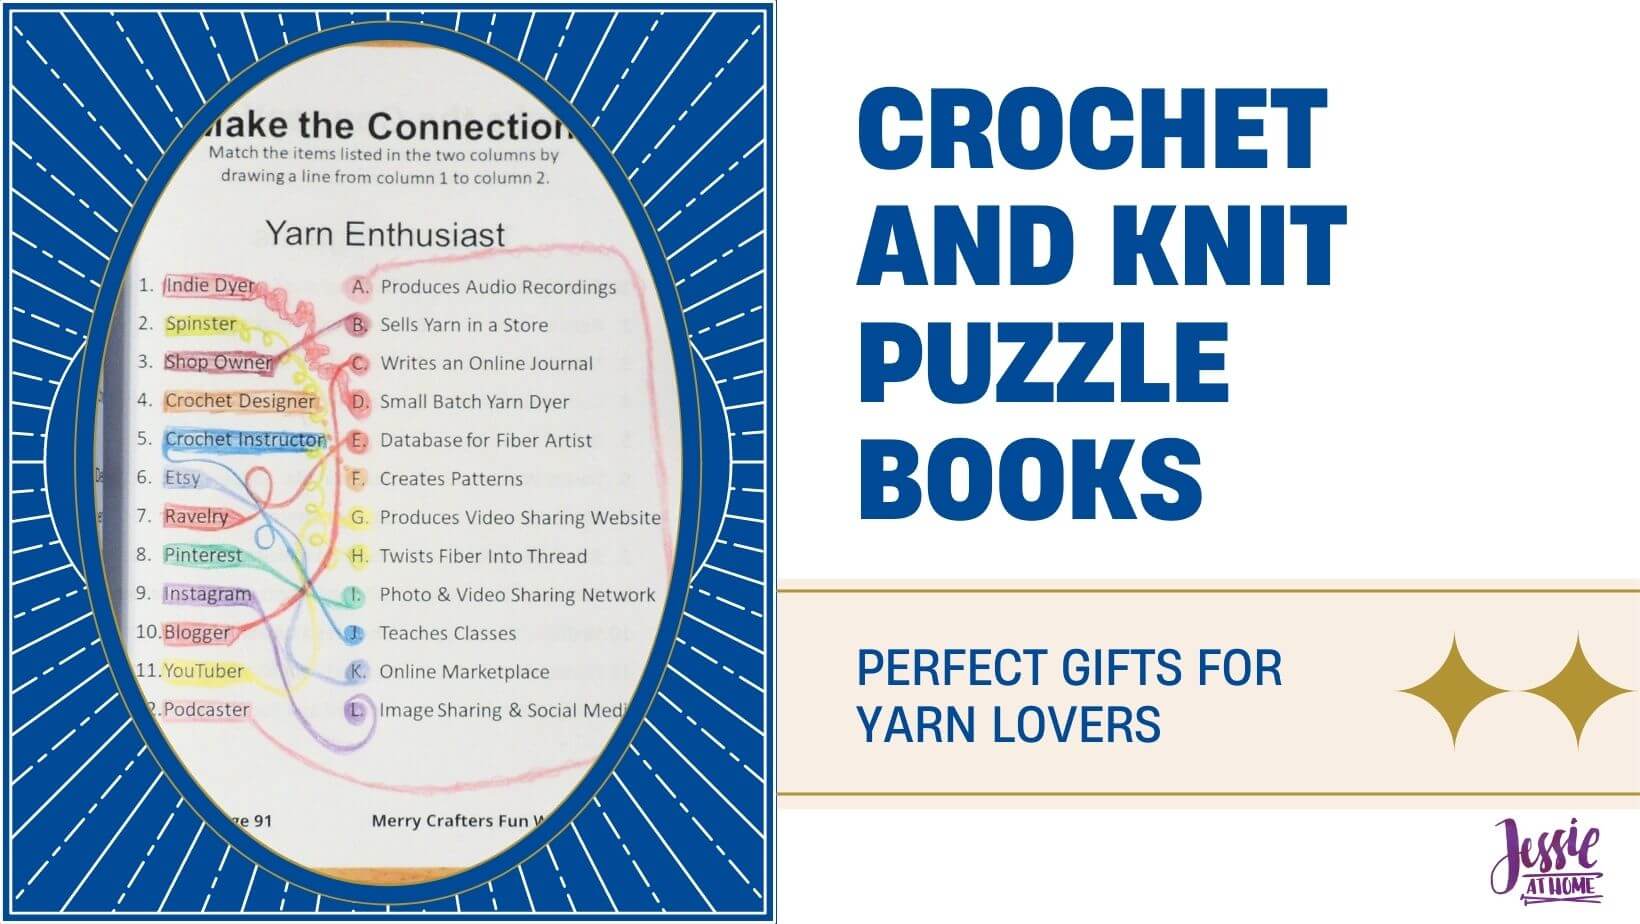 Gifts for Yarn Lovers – Crochet and Knit Puzzle Books They’re Sure To Love